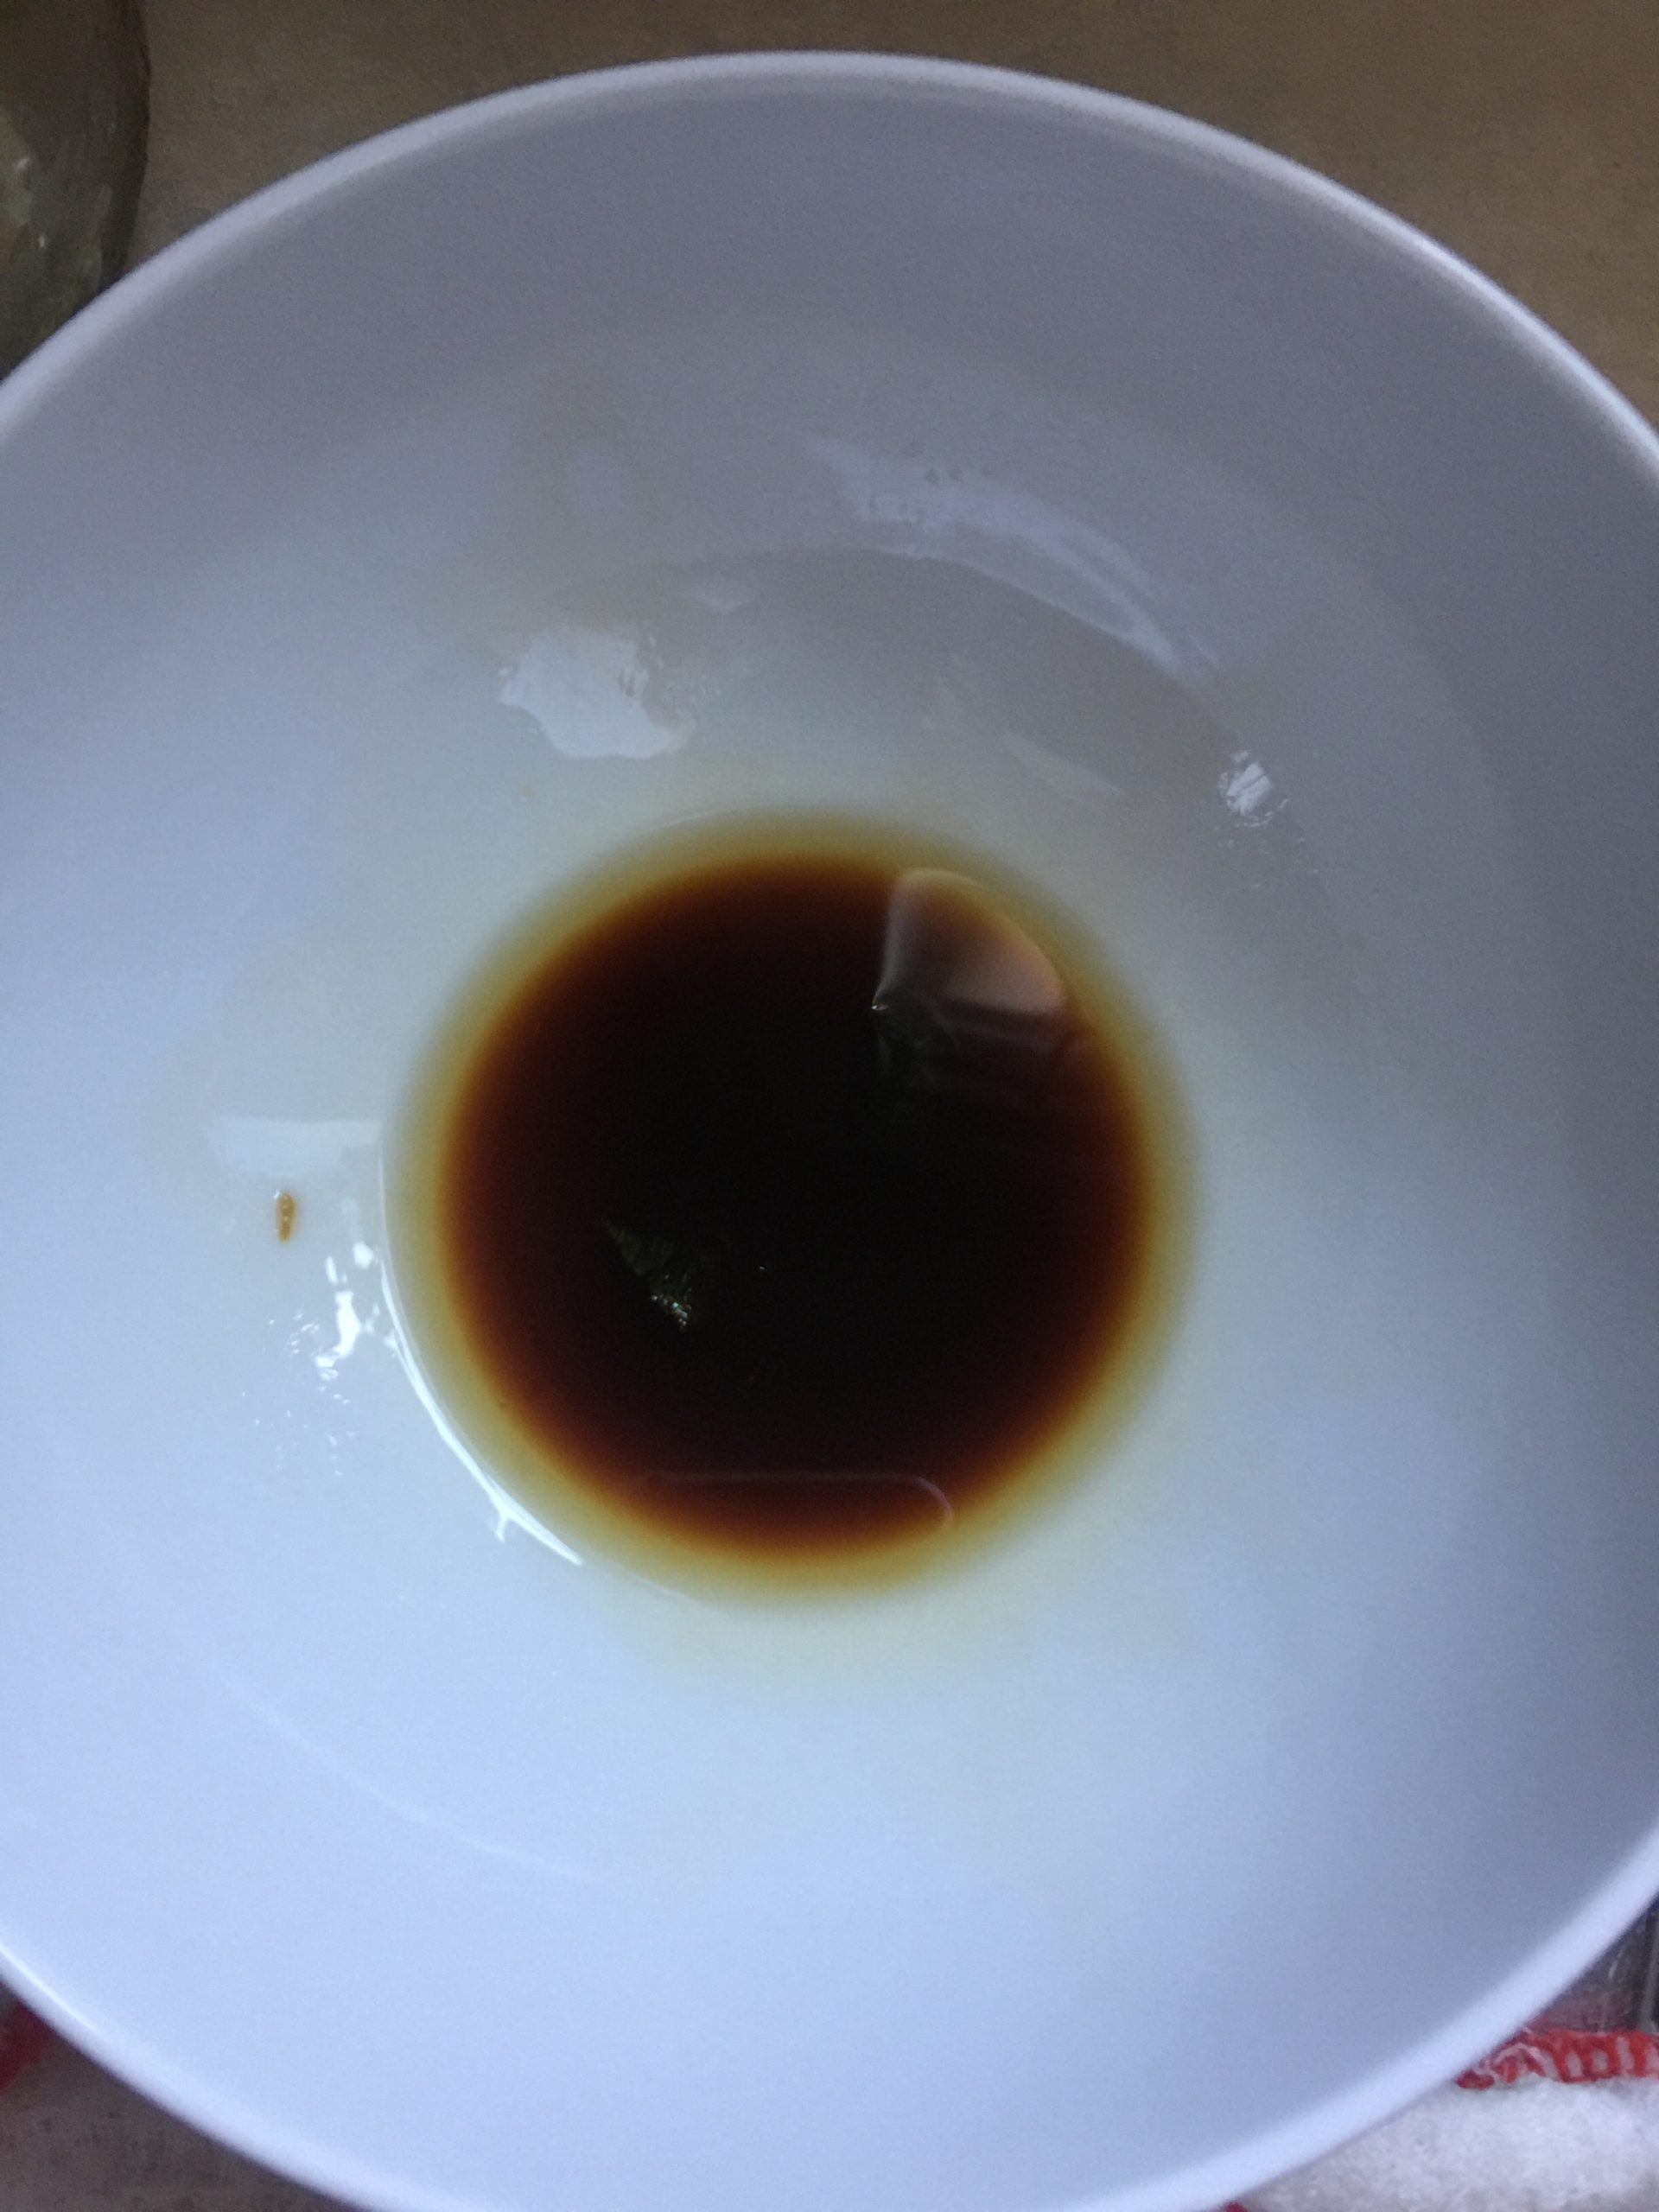 A white bowl contains 1 tablespoon soy sauce and 1 tablespoon sesame oil